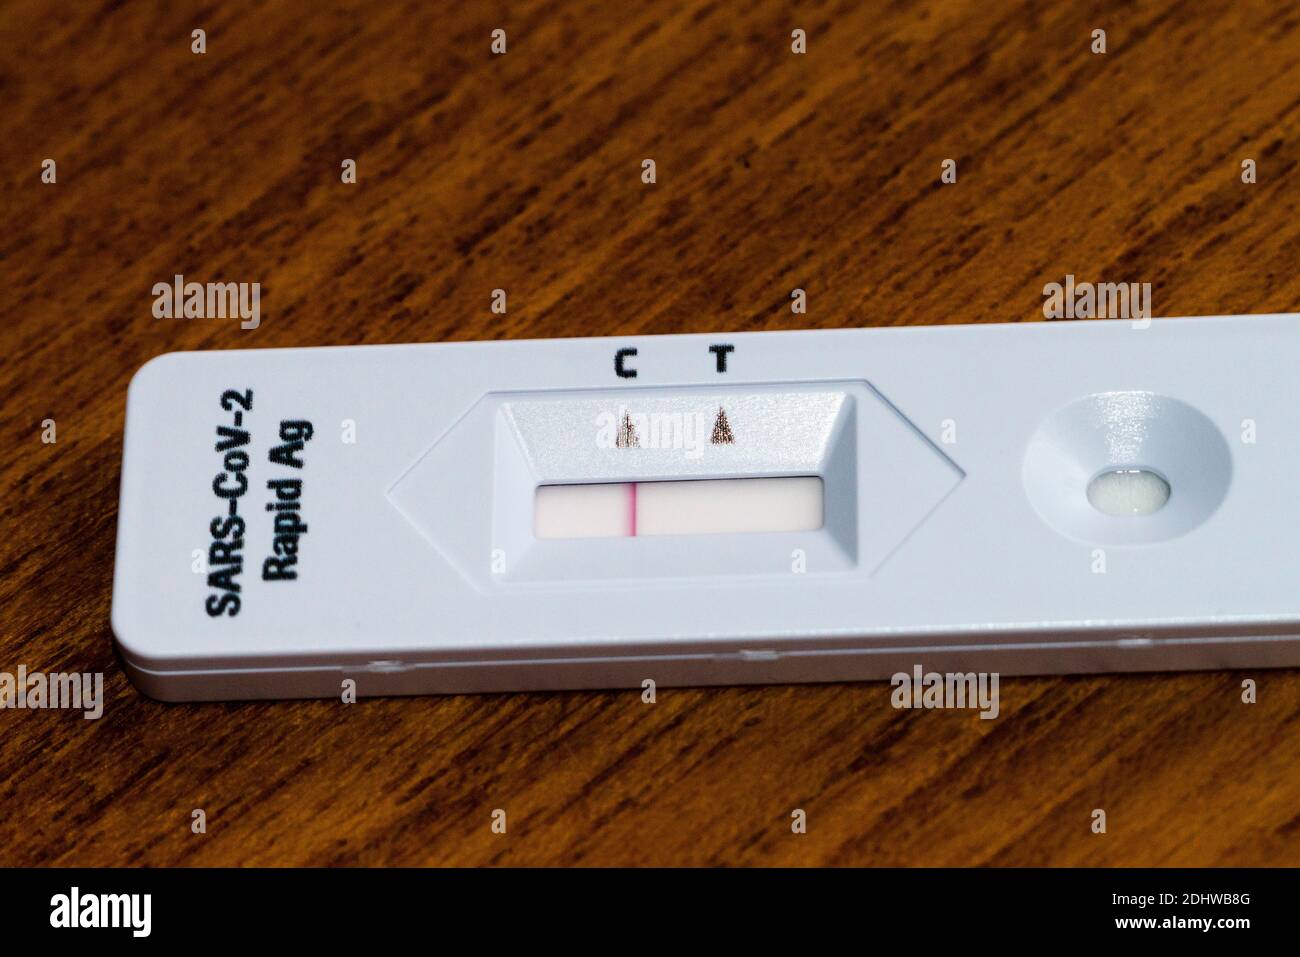 Rapid Antigen Test Against Covid 2 Displaying A Negative Test Result Stock Photo Alamy